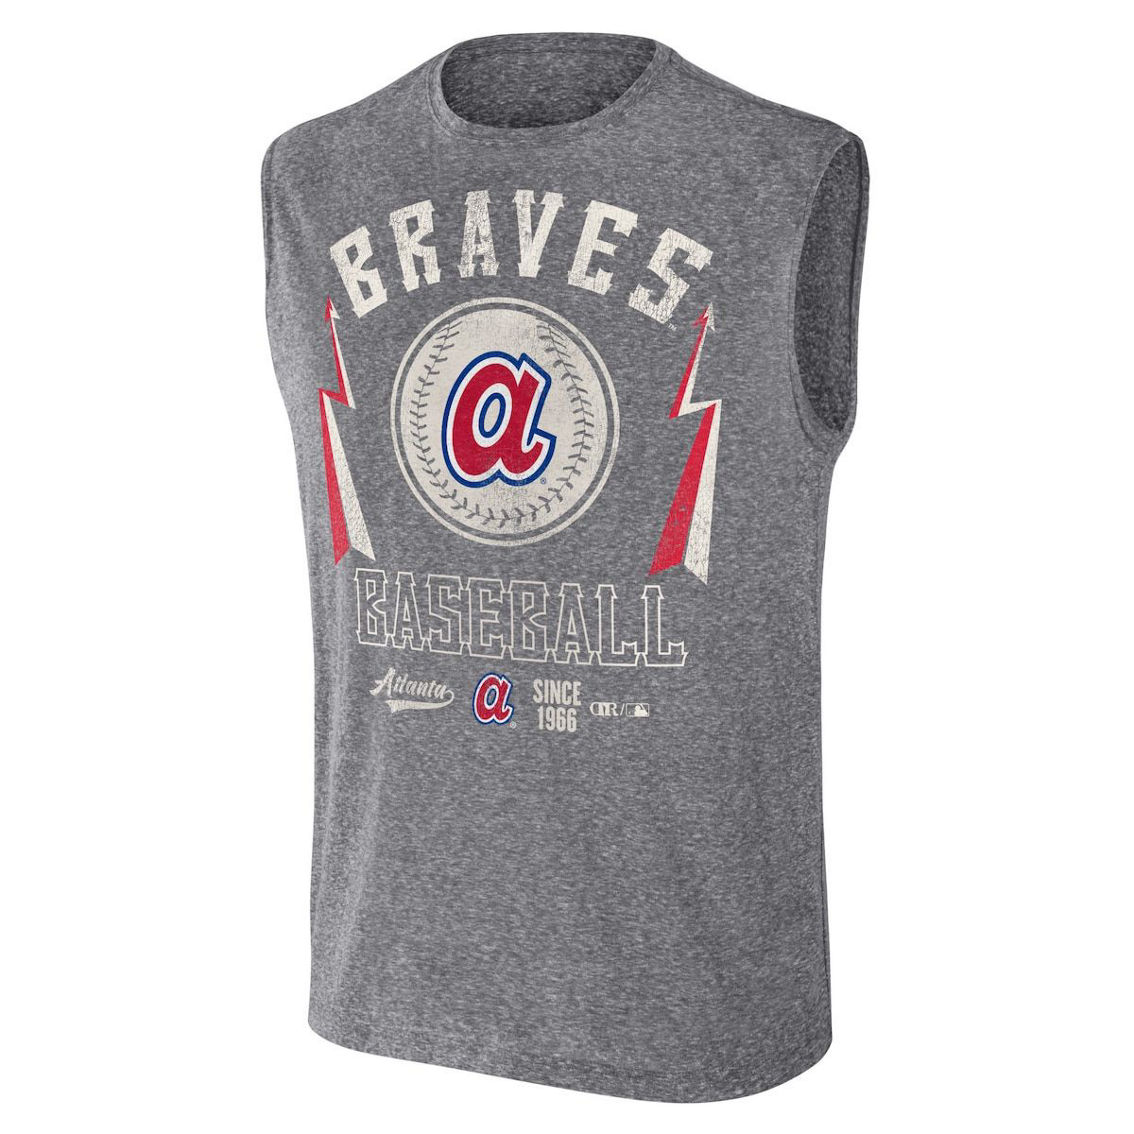 Darius Rucker Collection by Fanatics Men's Darius Rucker Collection by Fanatics Charcoal Atlanta Braves Muscle Tank Top - Image 3 of 4